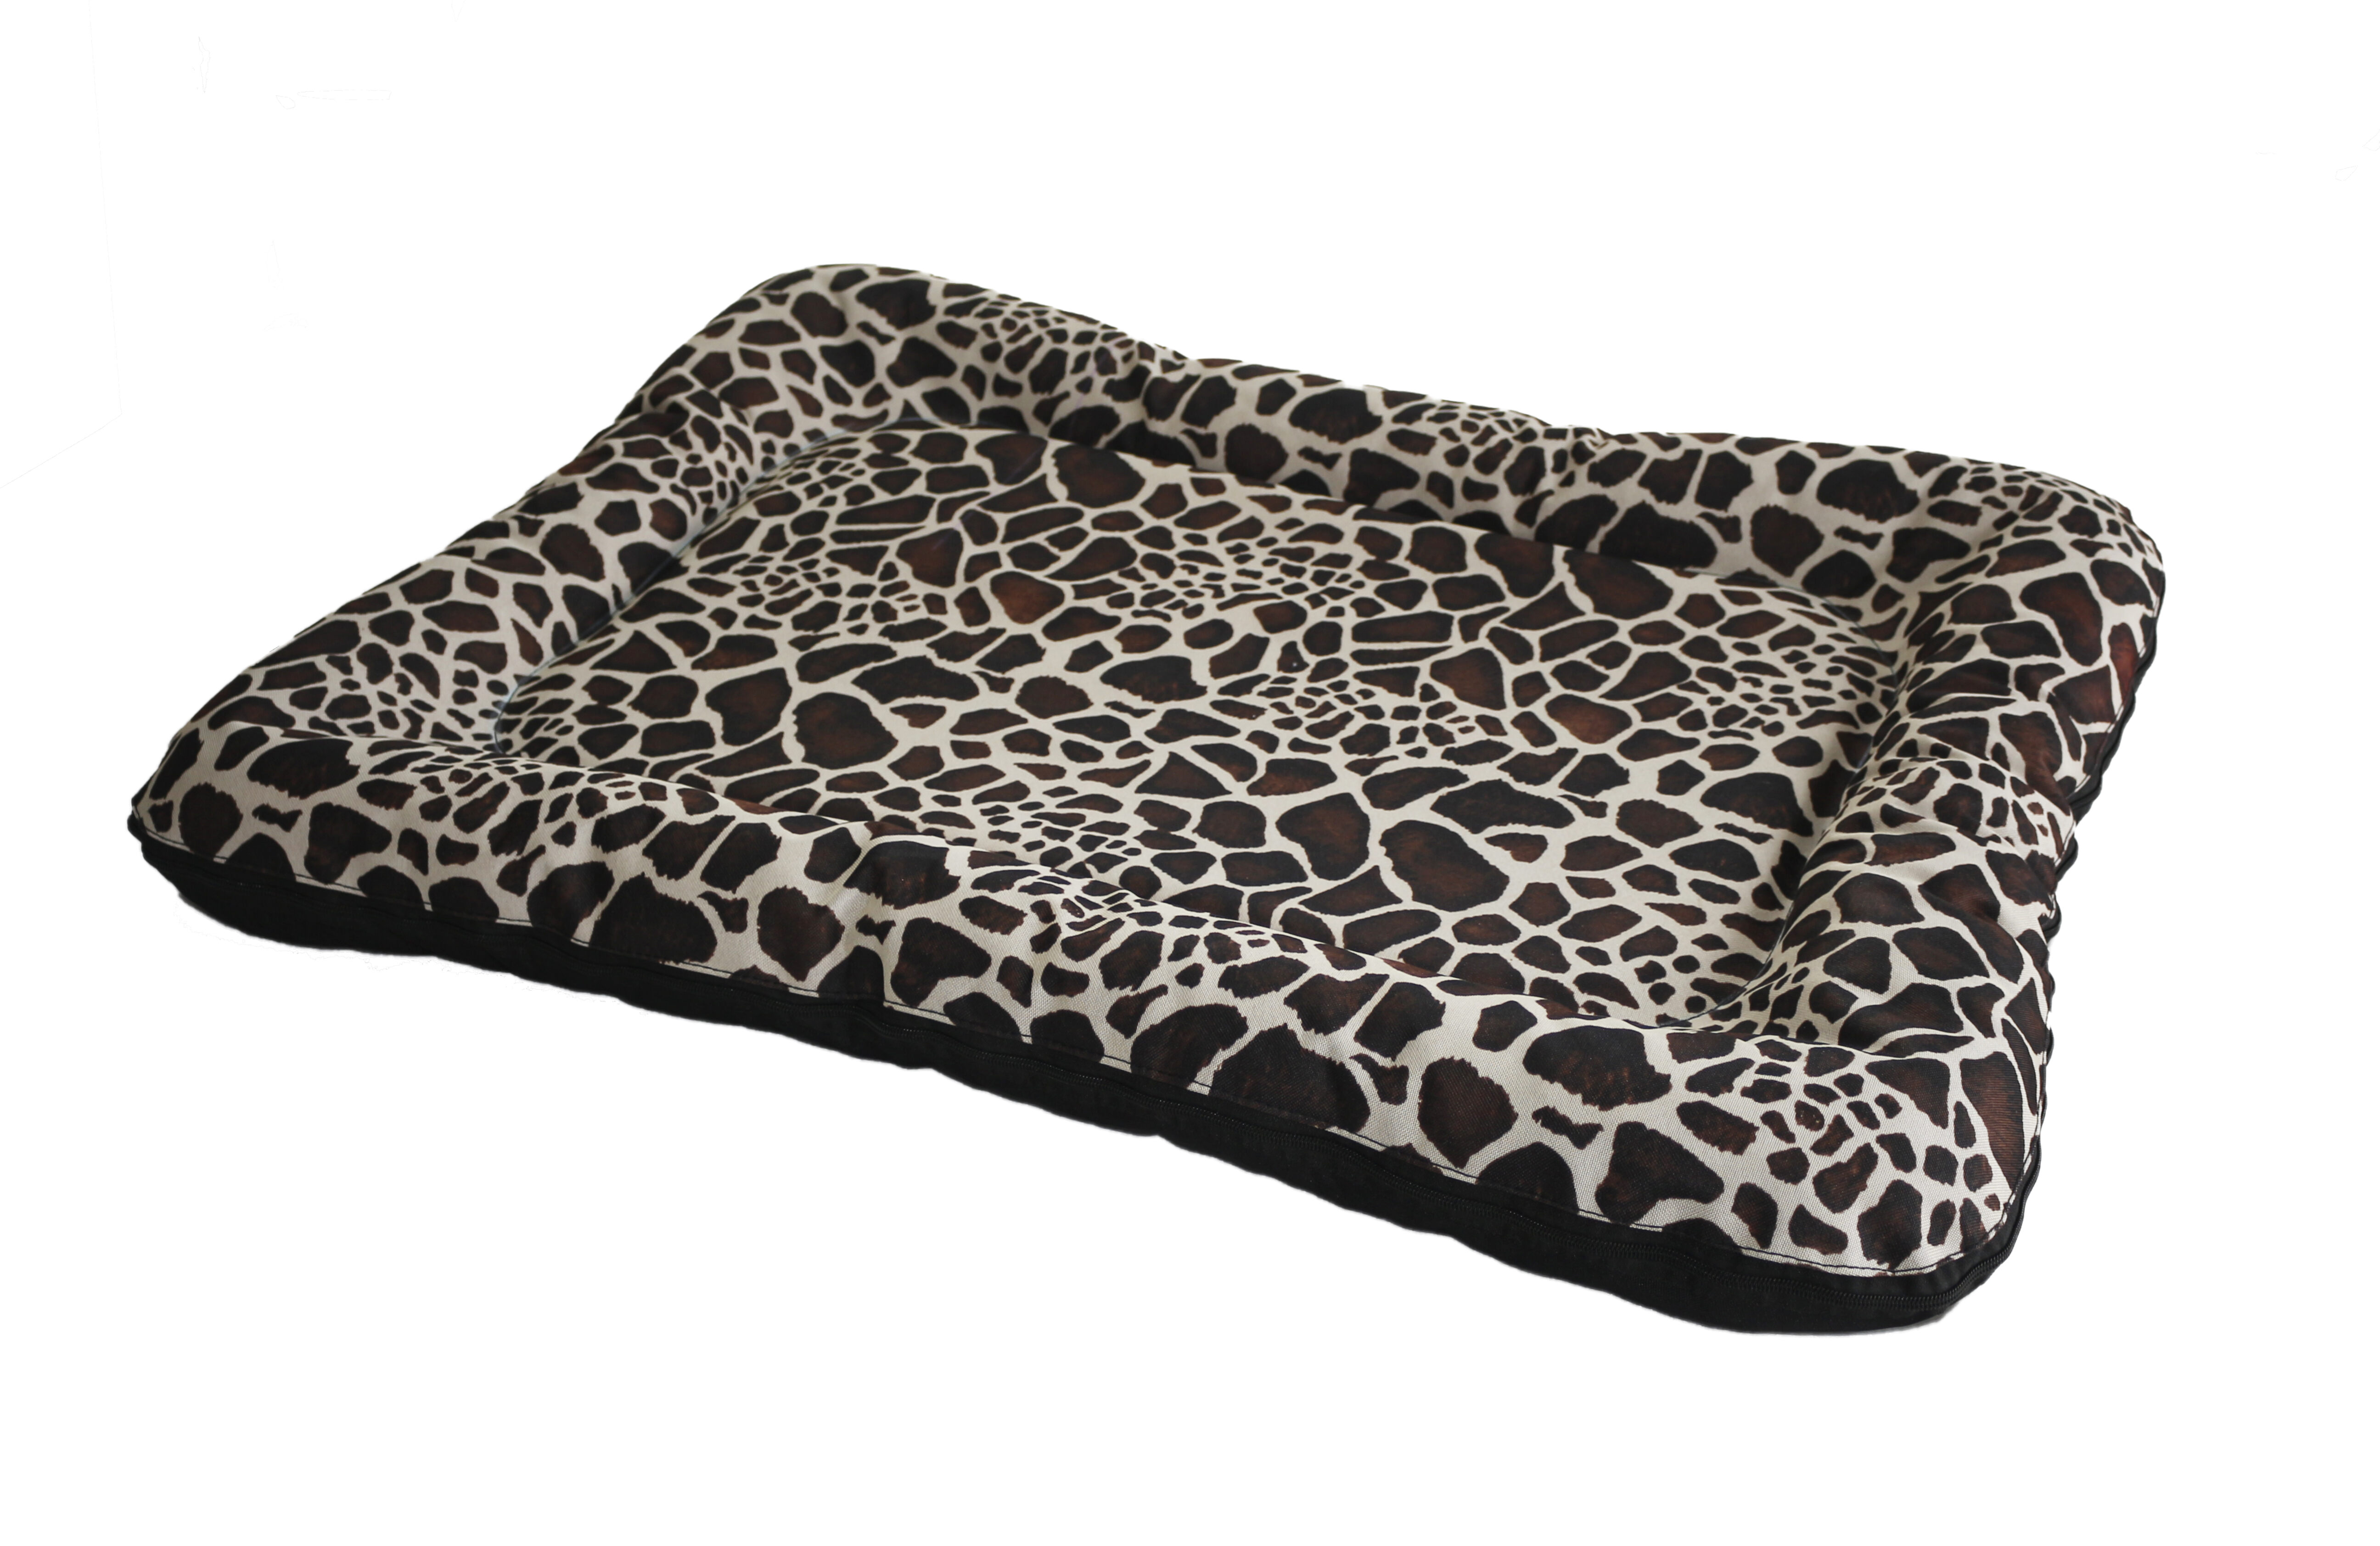 Rajen mattress for dogs, 6 sizes from 64x40 cm, motif P-26